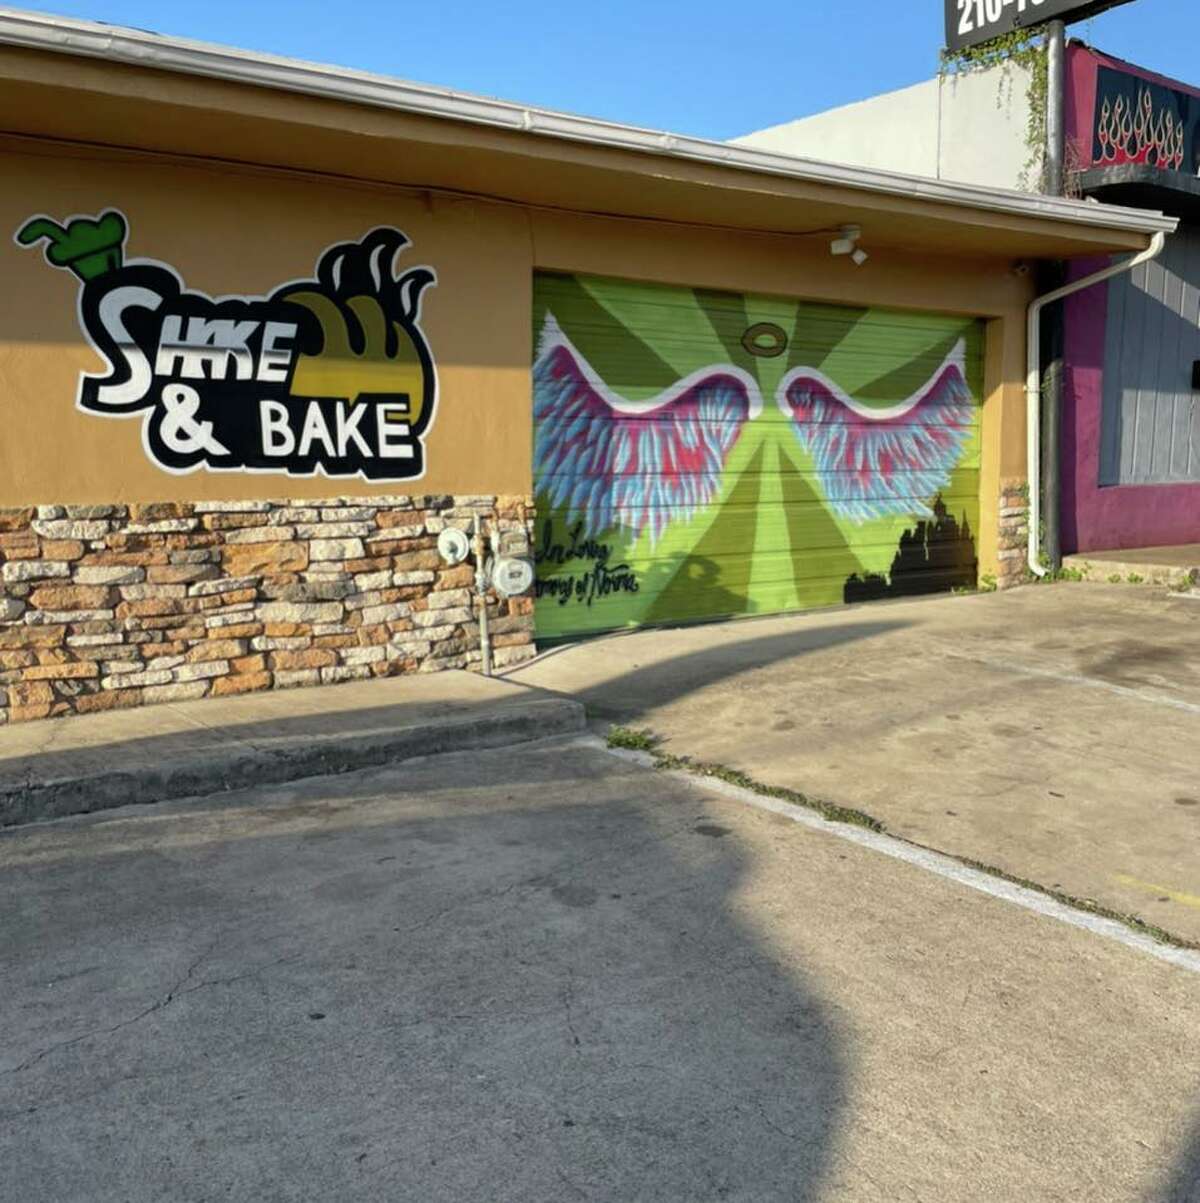  Shake and Bake, a keto-friendly bakery, opened near Beacon Hill in August. 